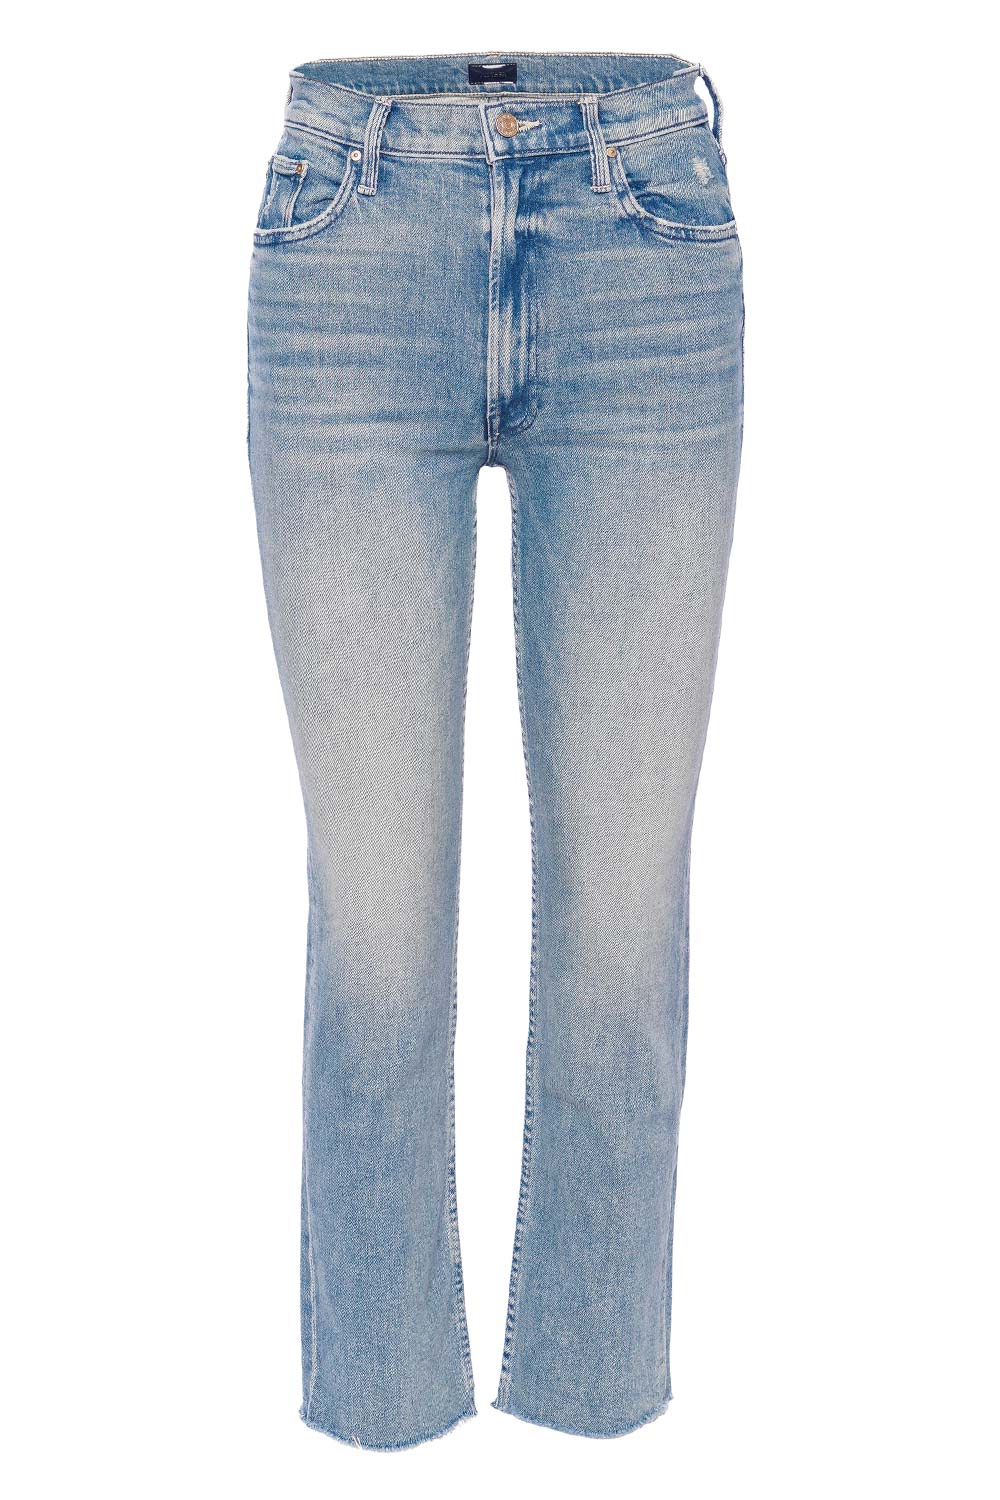 MOTHER Denim Fish Out of Water Rider Ankle Fray Jeans